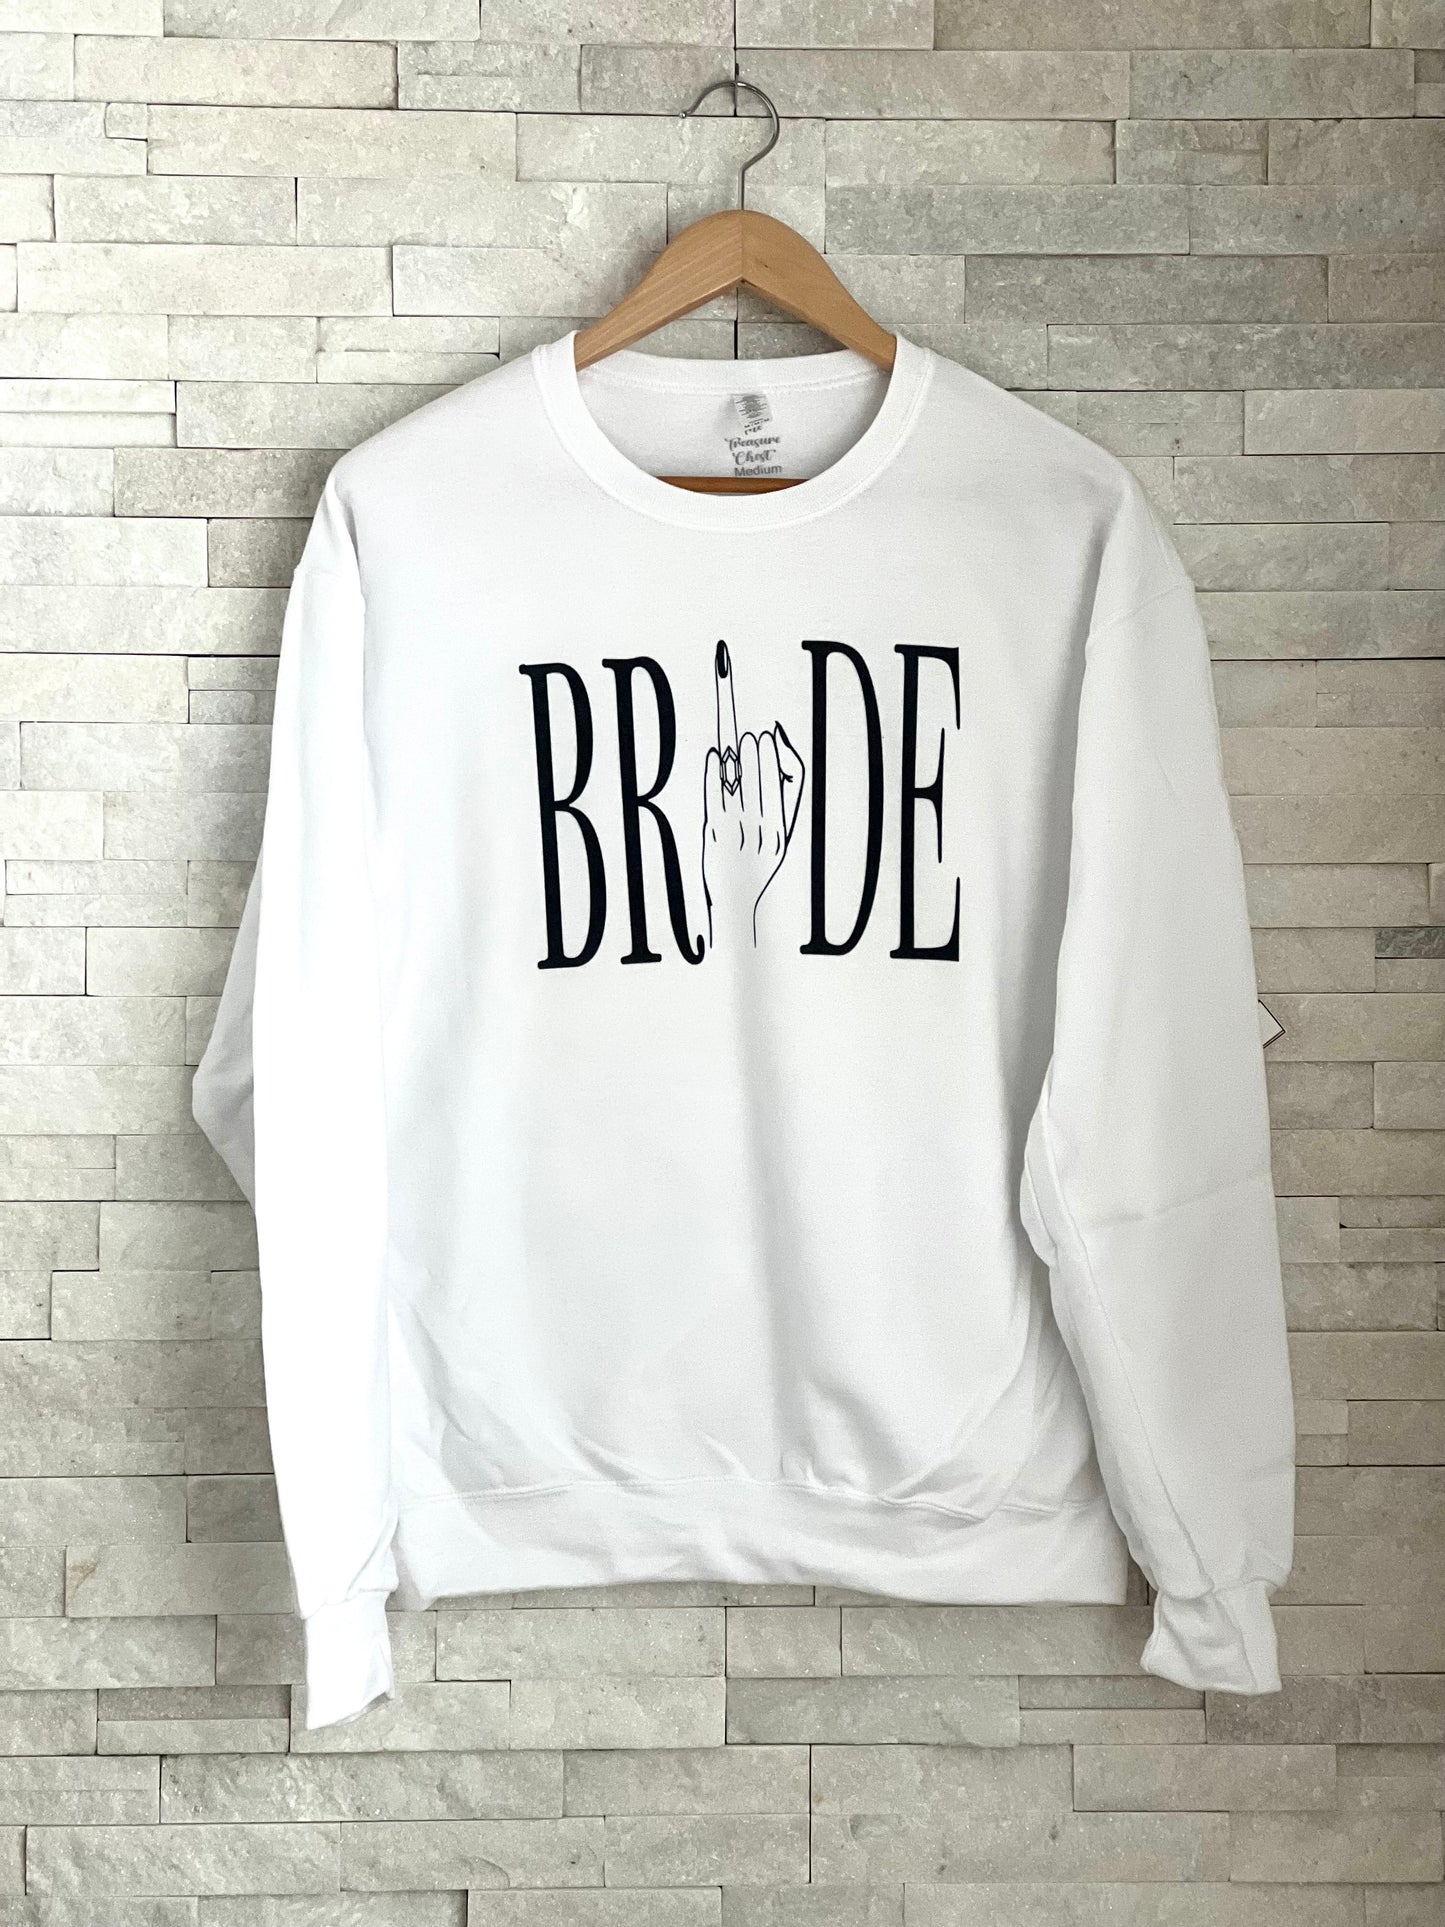 Introducing the Ring Finger Bride crewneck sweatshirt. Made of 50-50 cotton/poly blend, this sweatshirt is perfect for casual wear on lazy Sundays or any other day you want to feel cozy and comfortable. Its white colour makes it suitable for any occasions too! Pair it up with matching pants and shoes for a complete look or work out in style during the workout session.